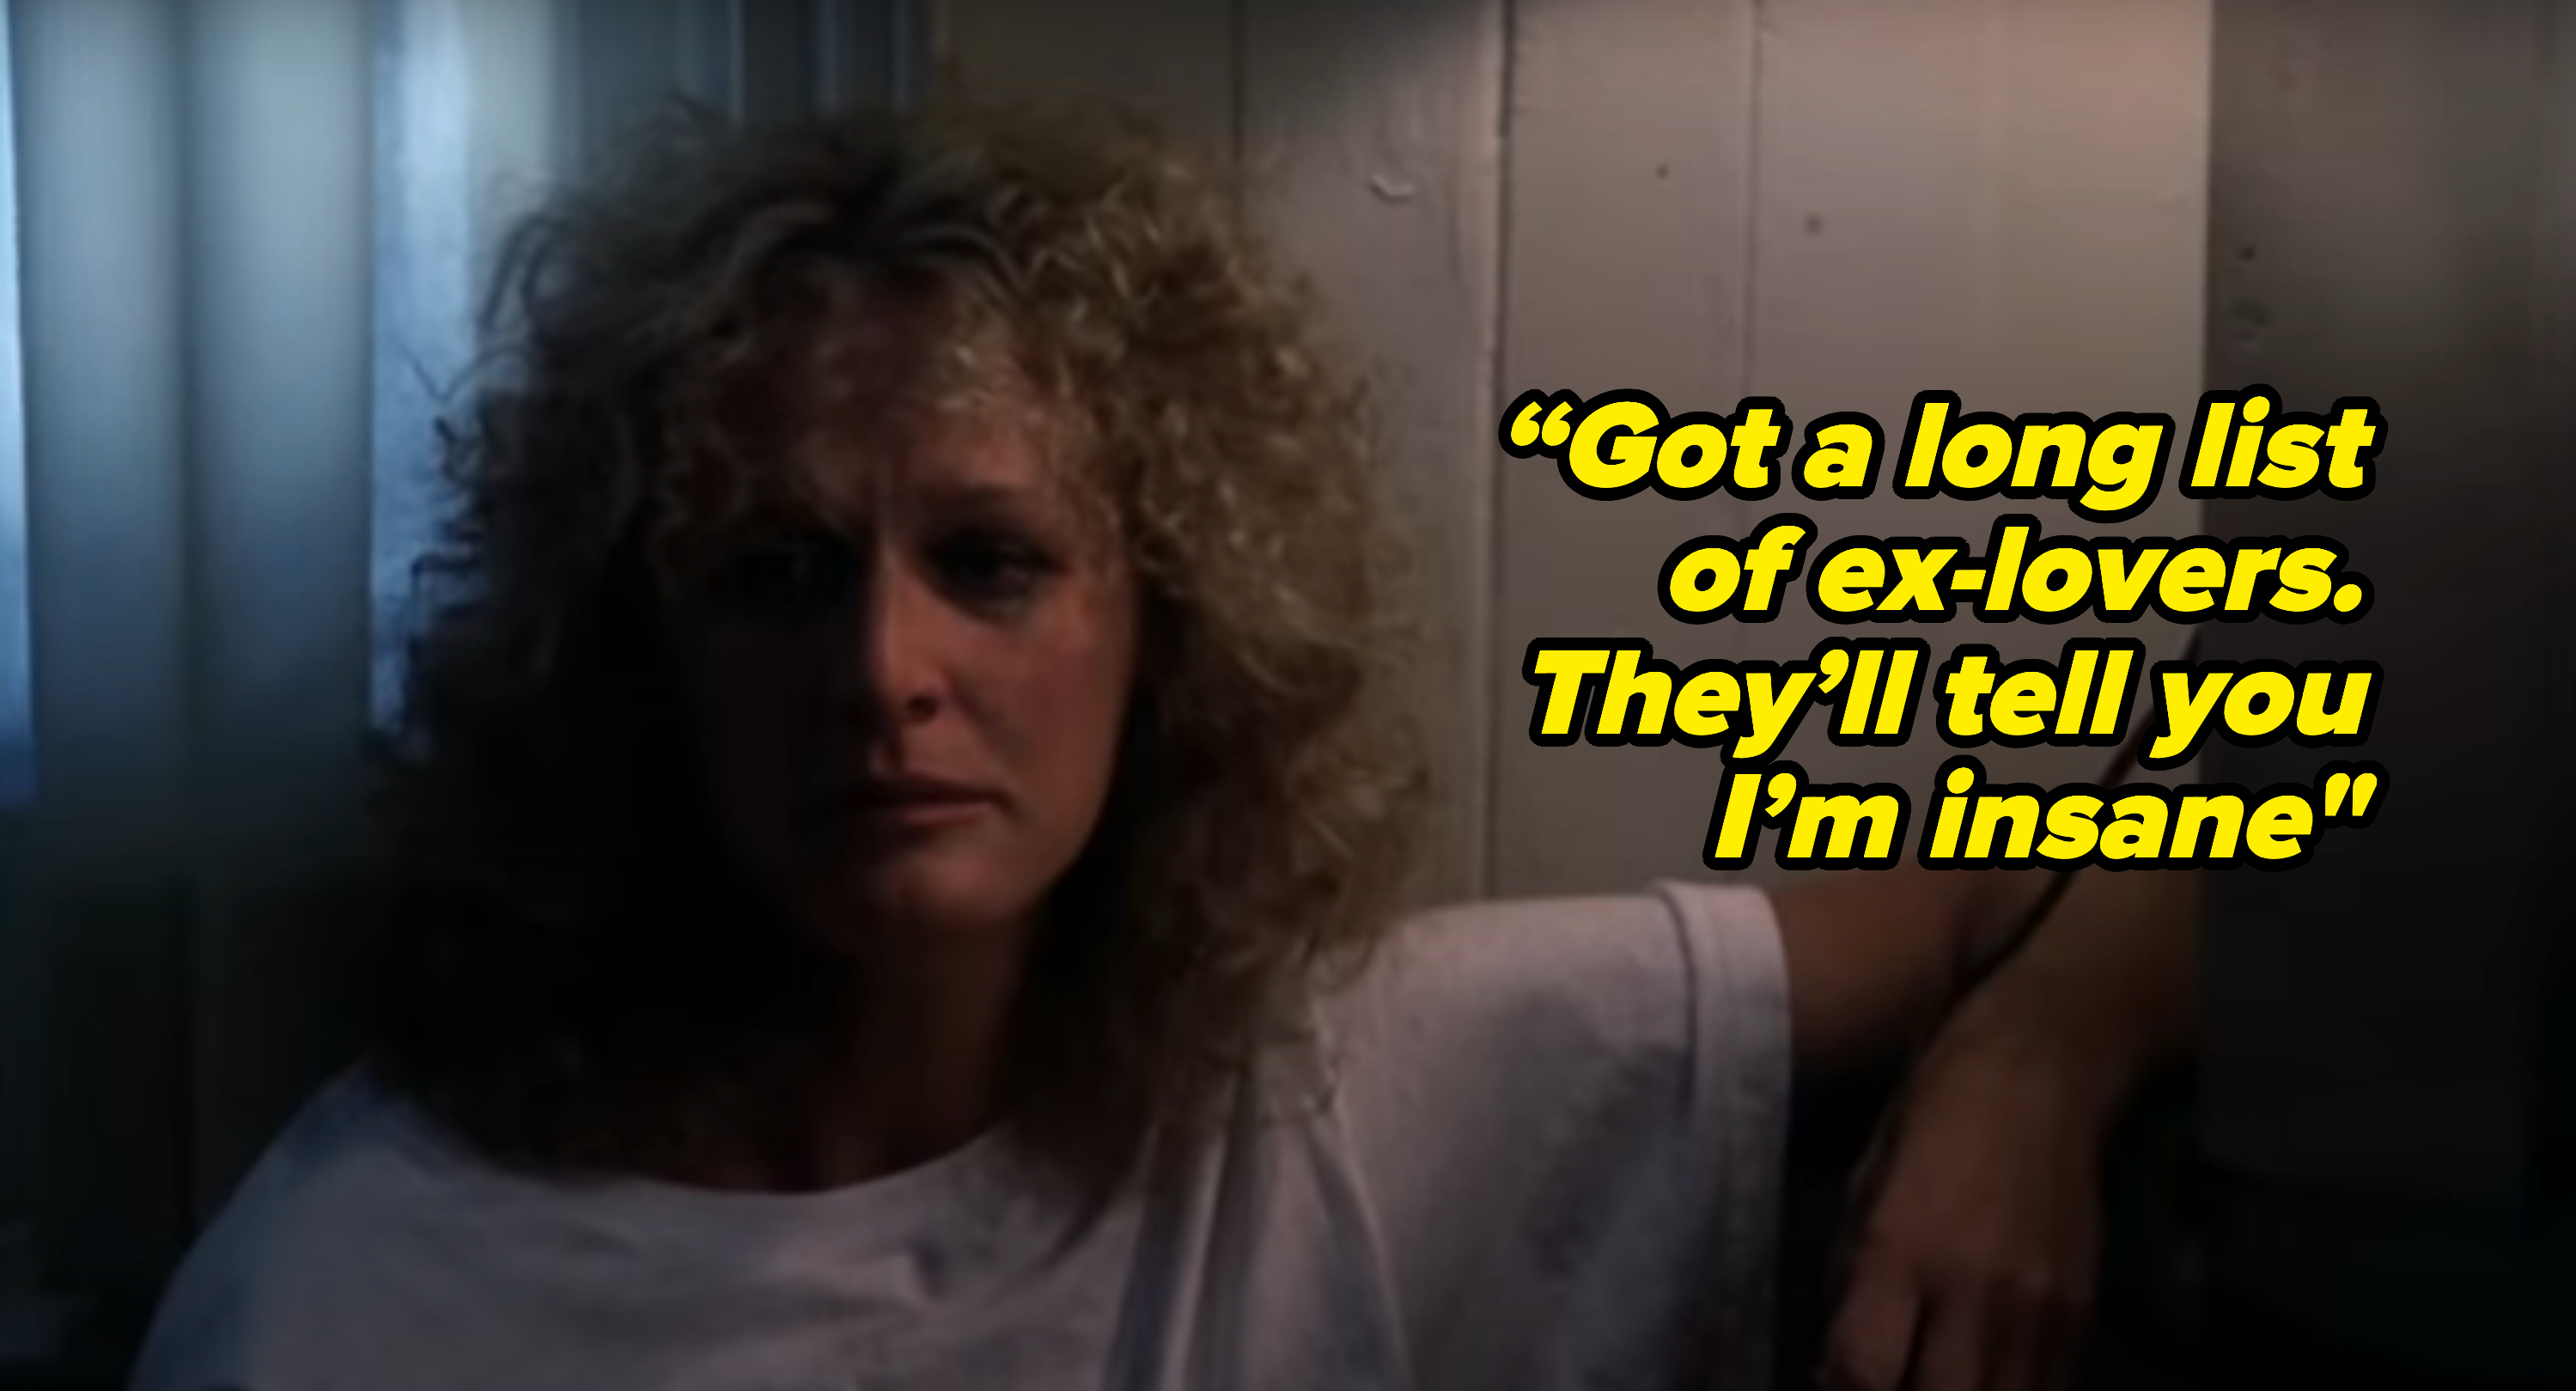 glenn close in fatal attraction and lyric: